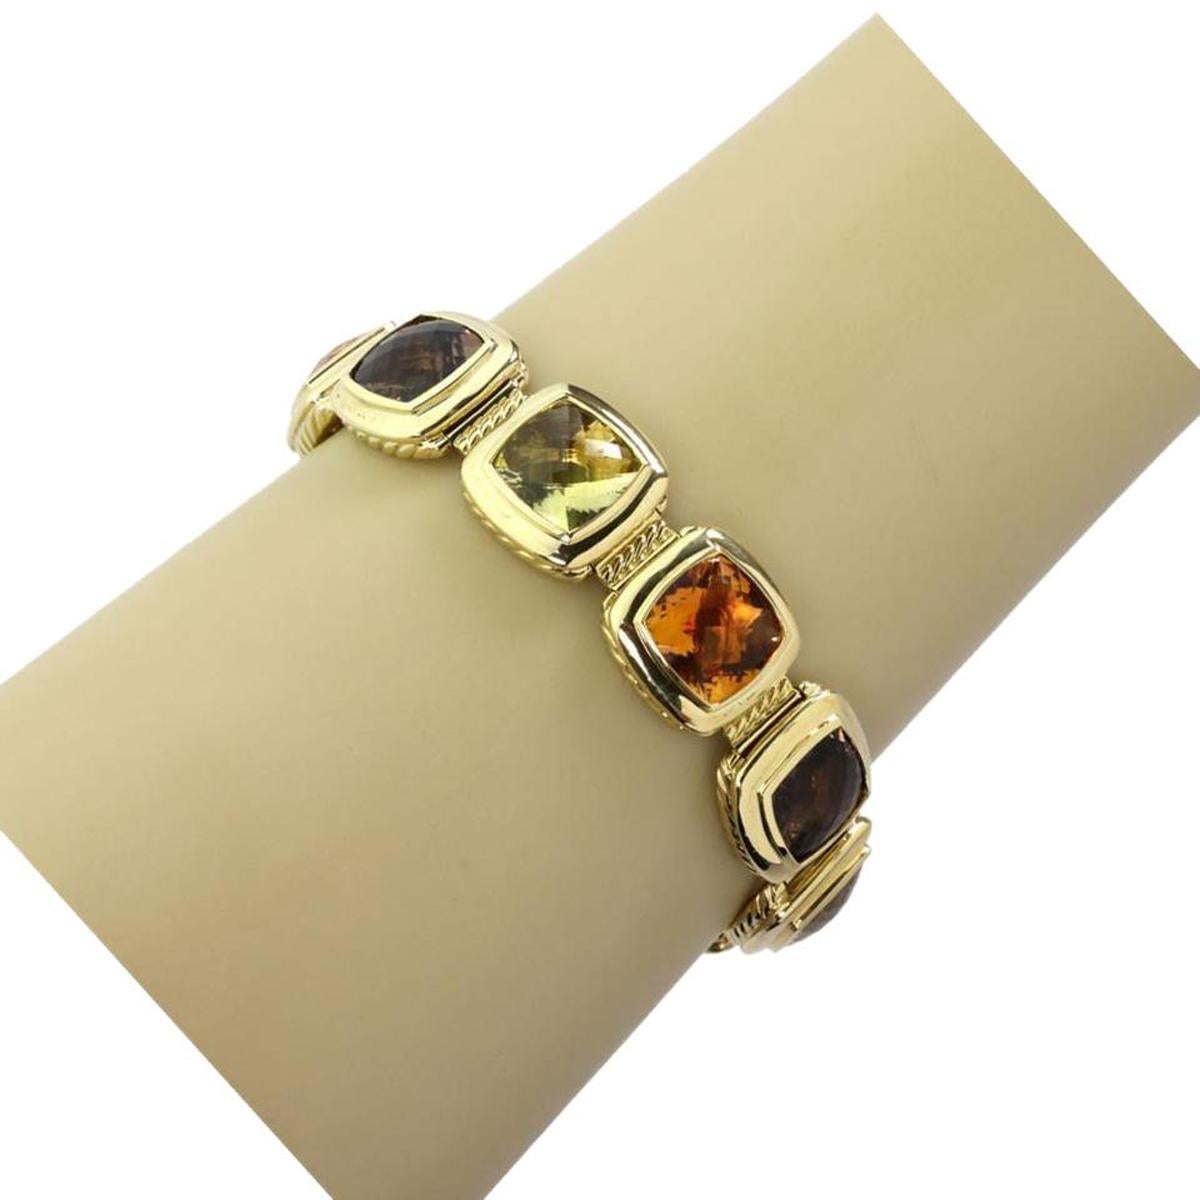 This stunning eye catching authentic bracelet is by David Yurman, it is crafted from 18k yellow gold with a high polished finish and has 10 cushion shaped frame, each joined together by a long slim cable hinged link. There are 9 faceted cut